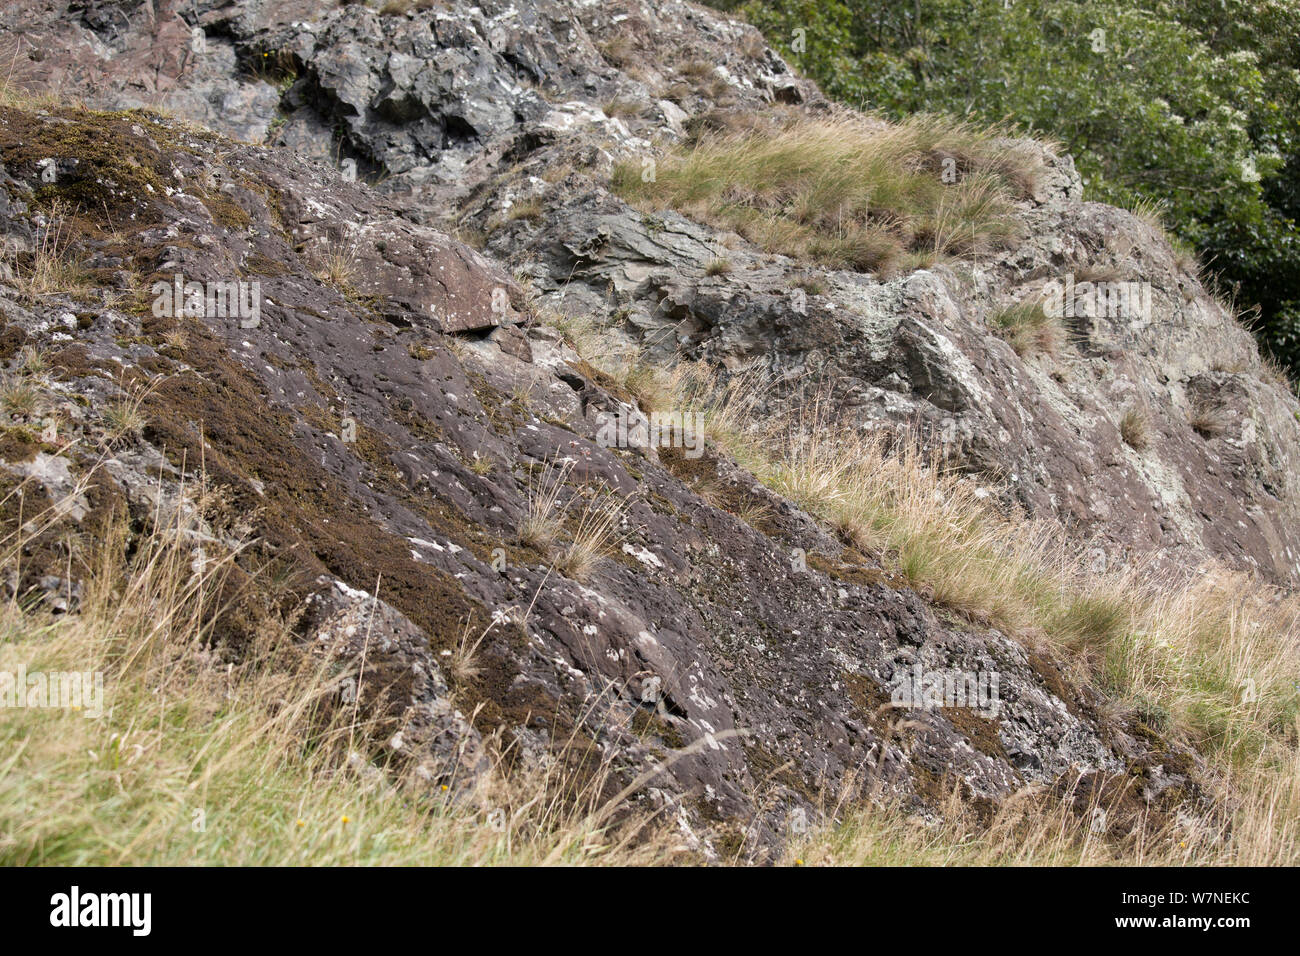 Meadow grasses and flowers over igneous rocks. Stanner Rocks National Nature Reserve, Powys, Wales, UK, September. Stock Photo